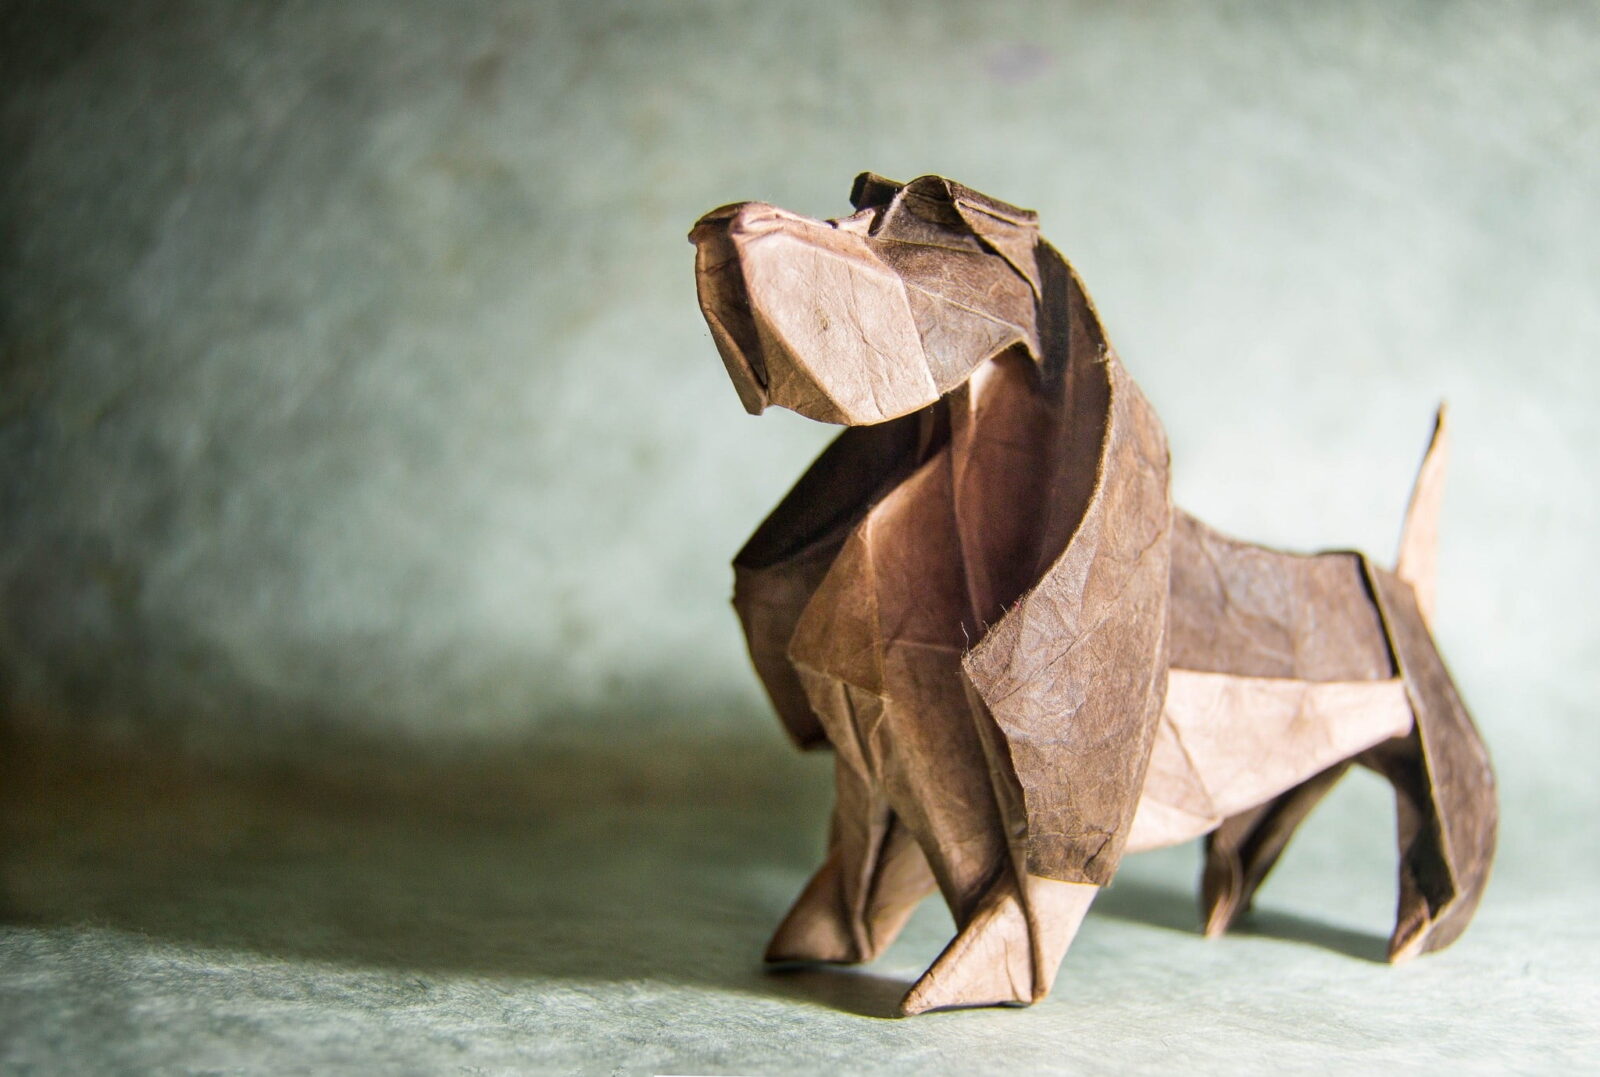 It’s Pretty Obvious What Generation You Are from Based on Your “Would You Rather” Activity Choices Origami dog animal